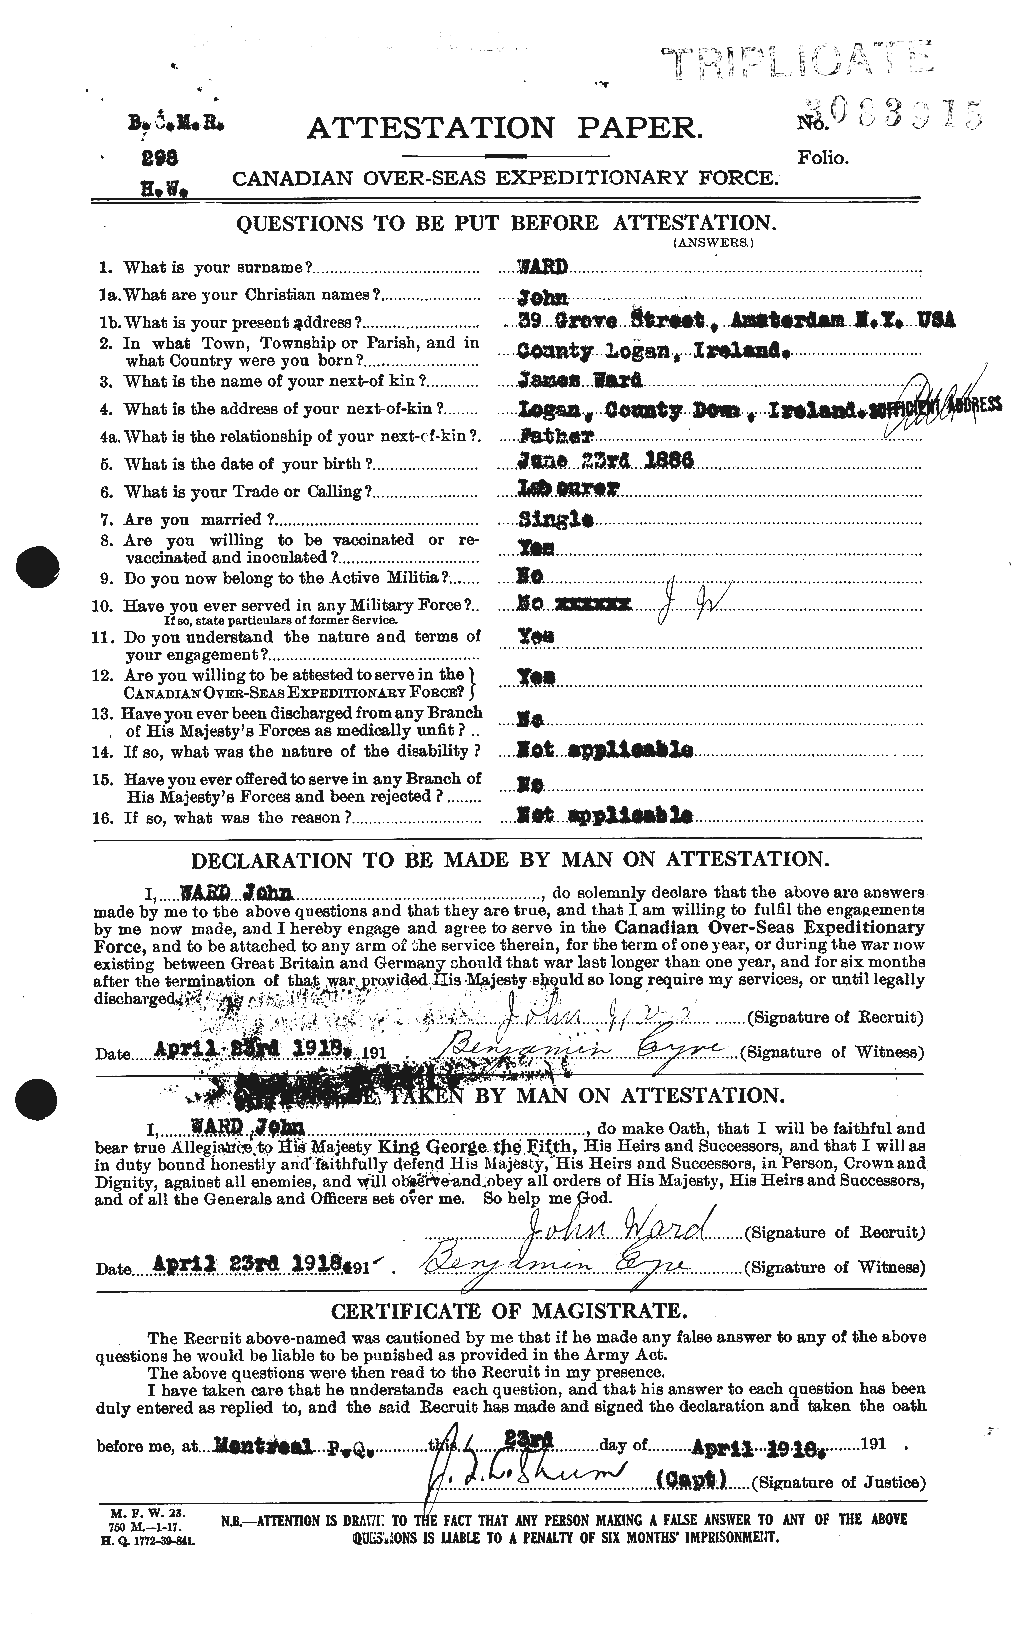 Personnel Records of the First World War - CEF 659503a